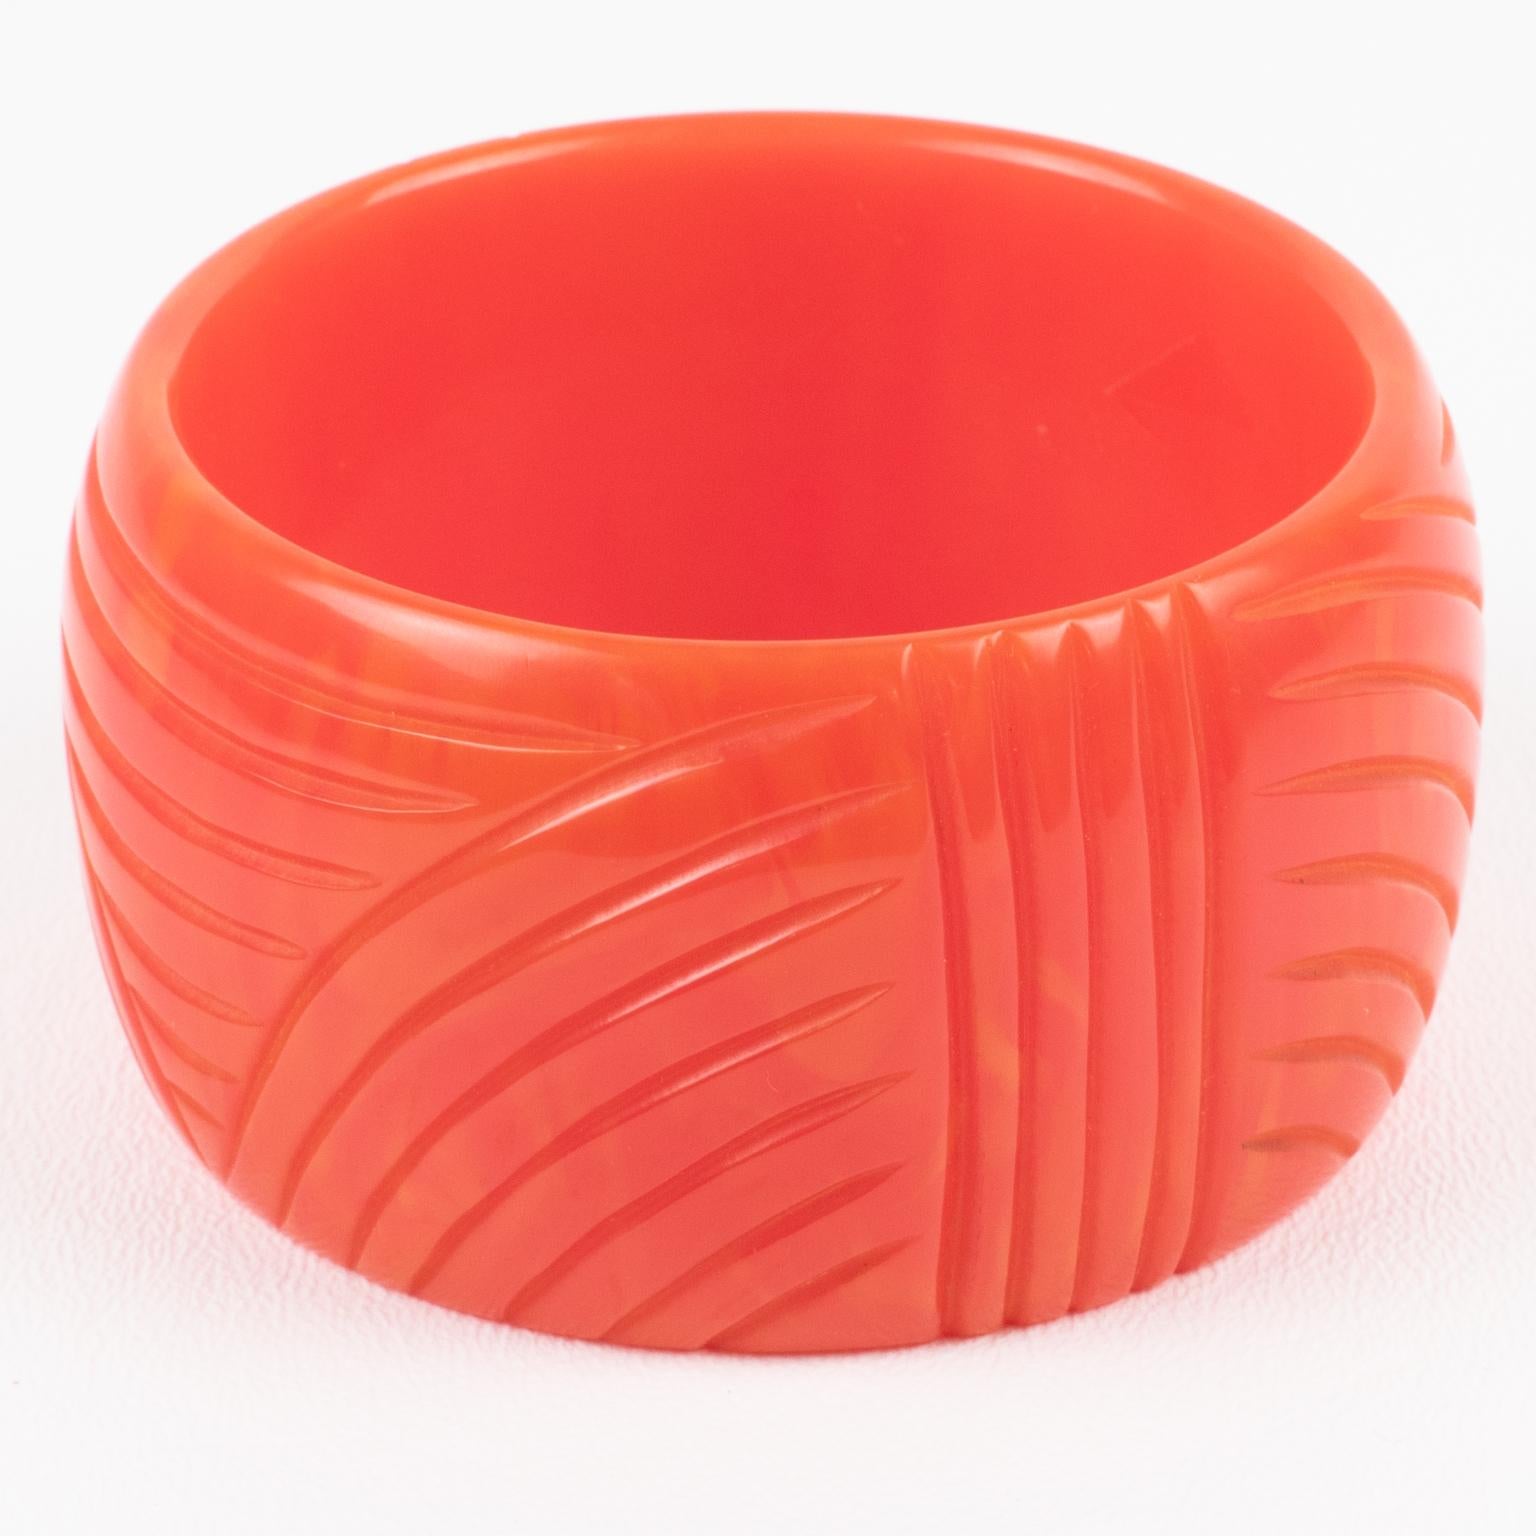 This is a lovely pink tequila sunrise marble Bakelite bracelet bangle. It features a rare chunky domed oversized shape with deep geometric carving all around. The color is an intense pink marble tone with orange cloudy swirling also called tequila